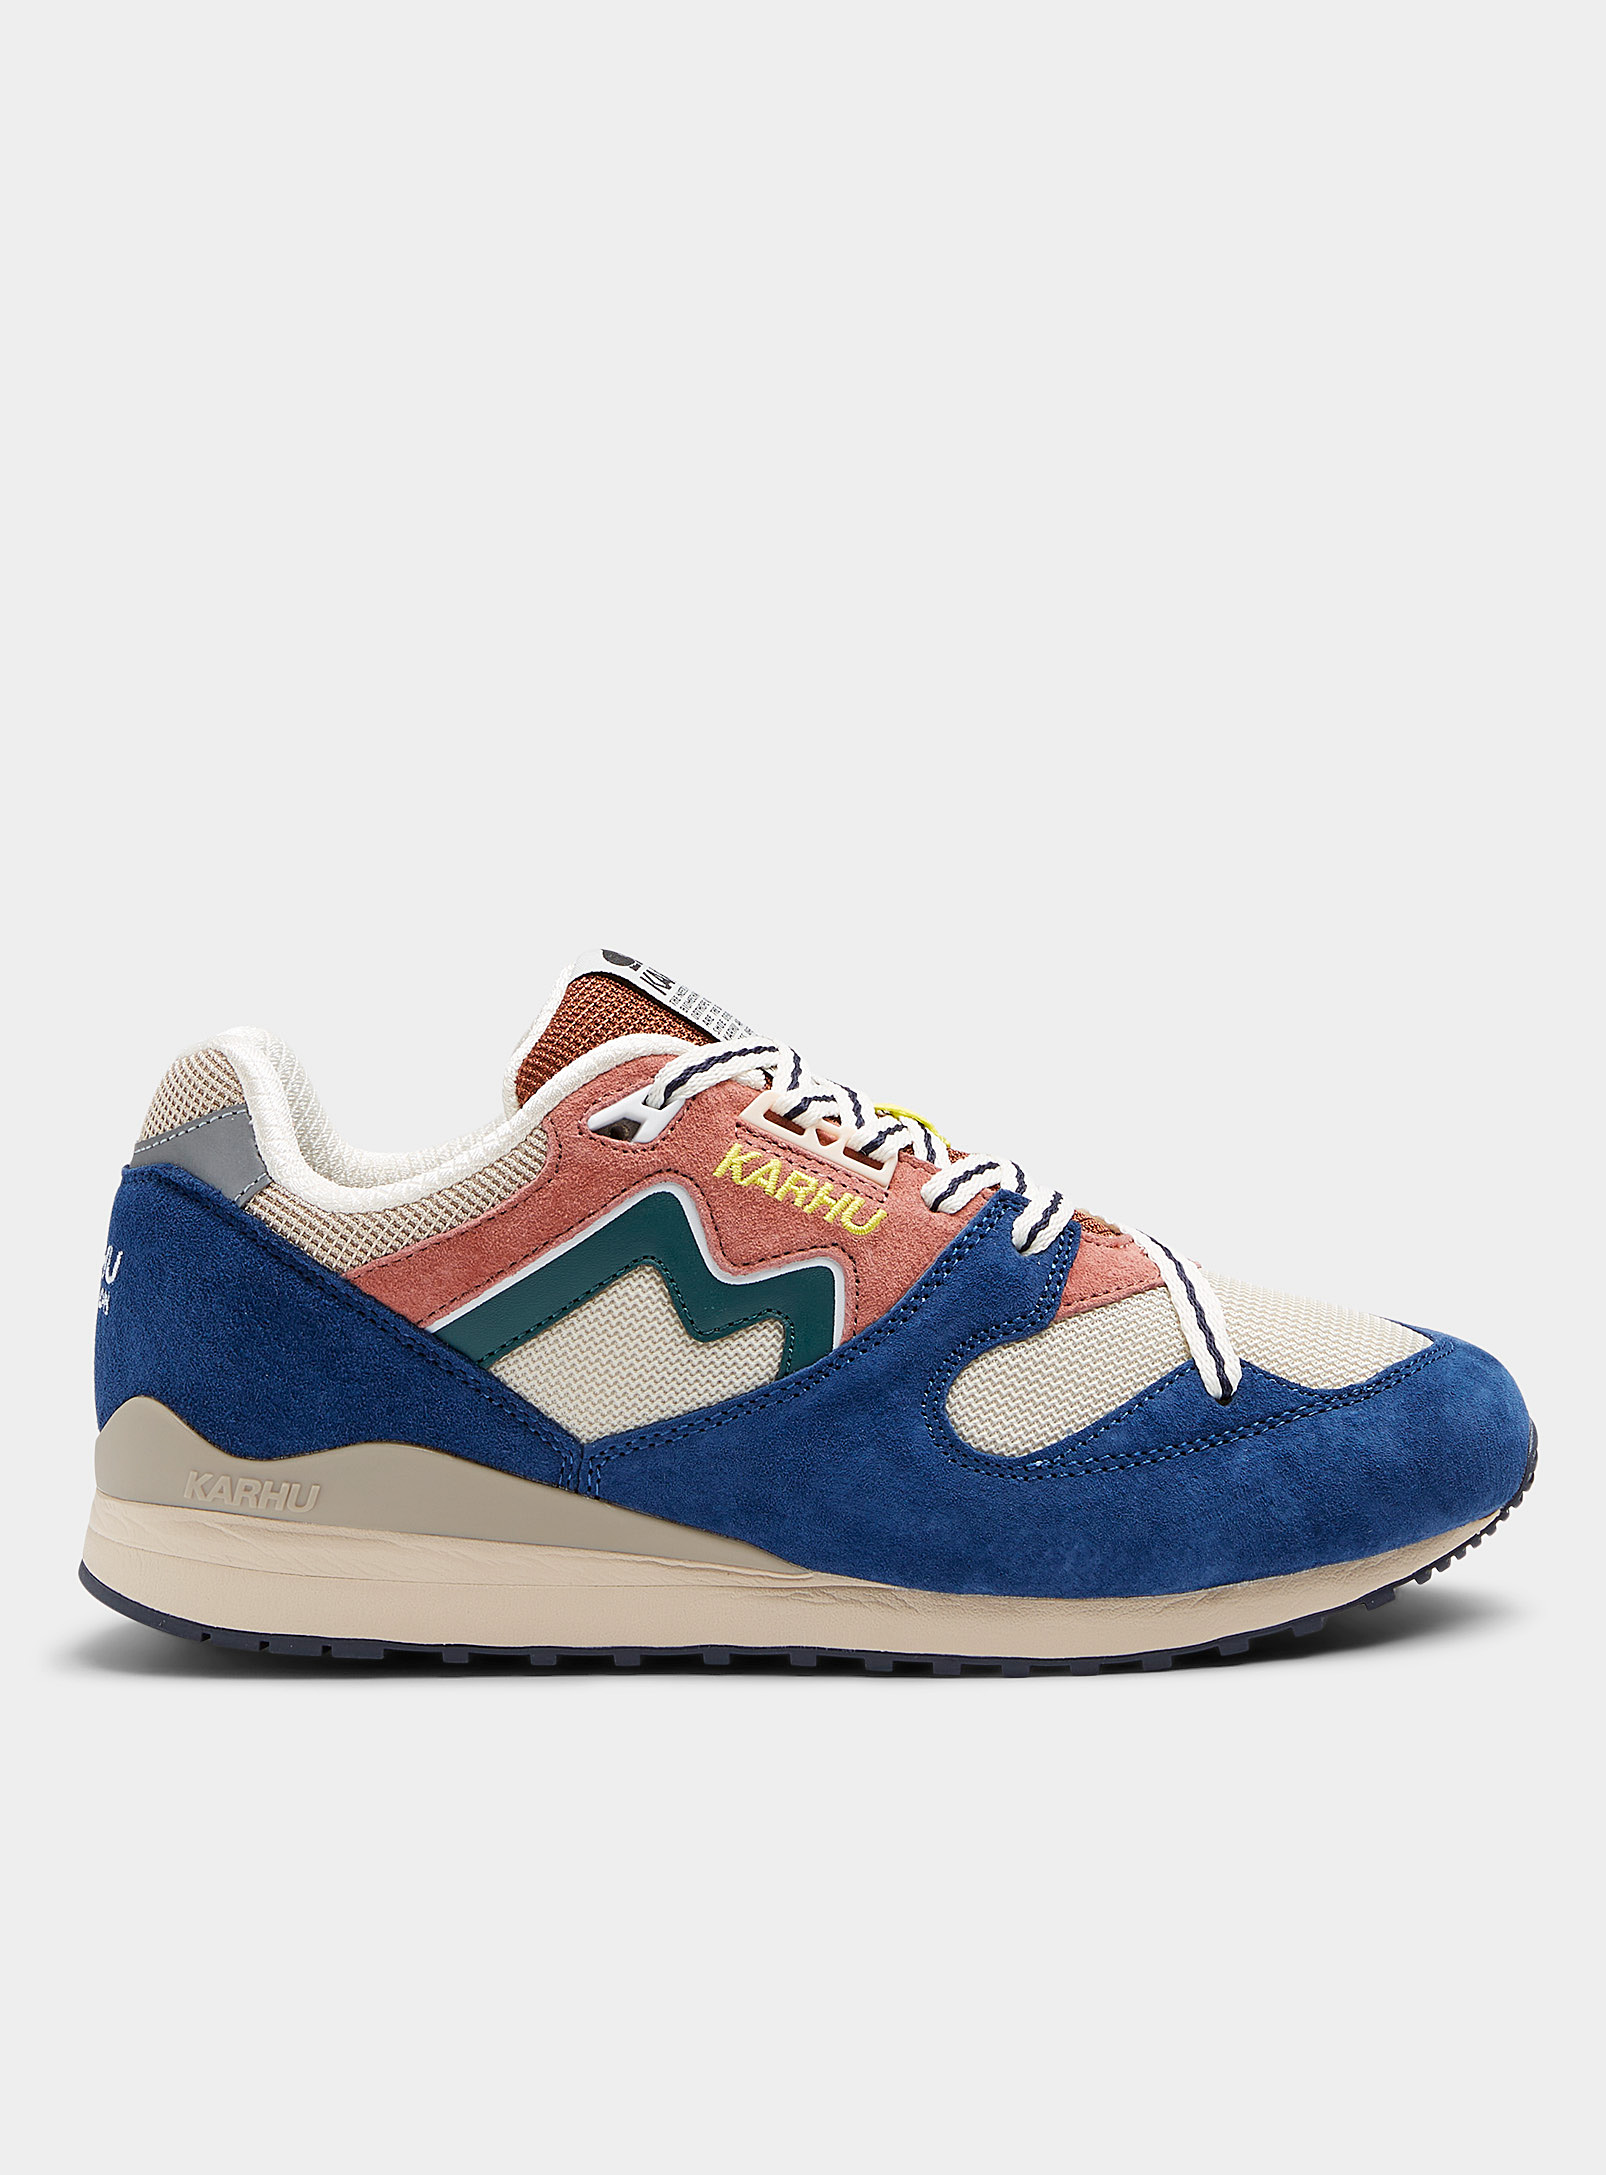 Karhu - Chaussures Le Sneaker Synchron Homme